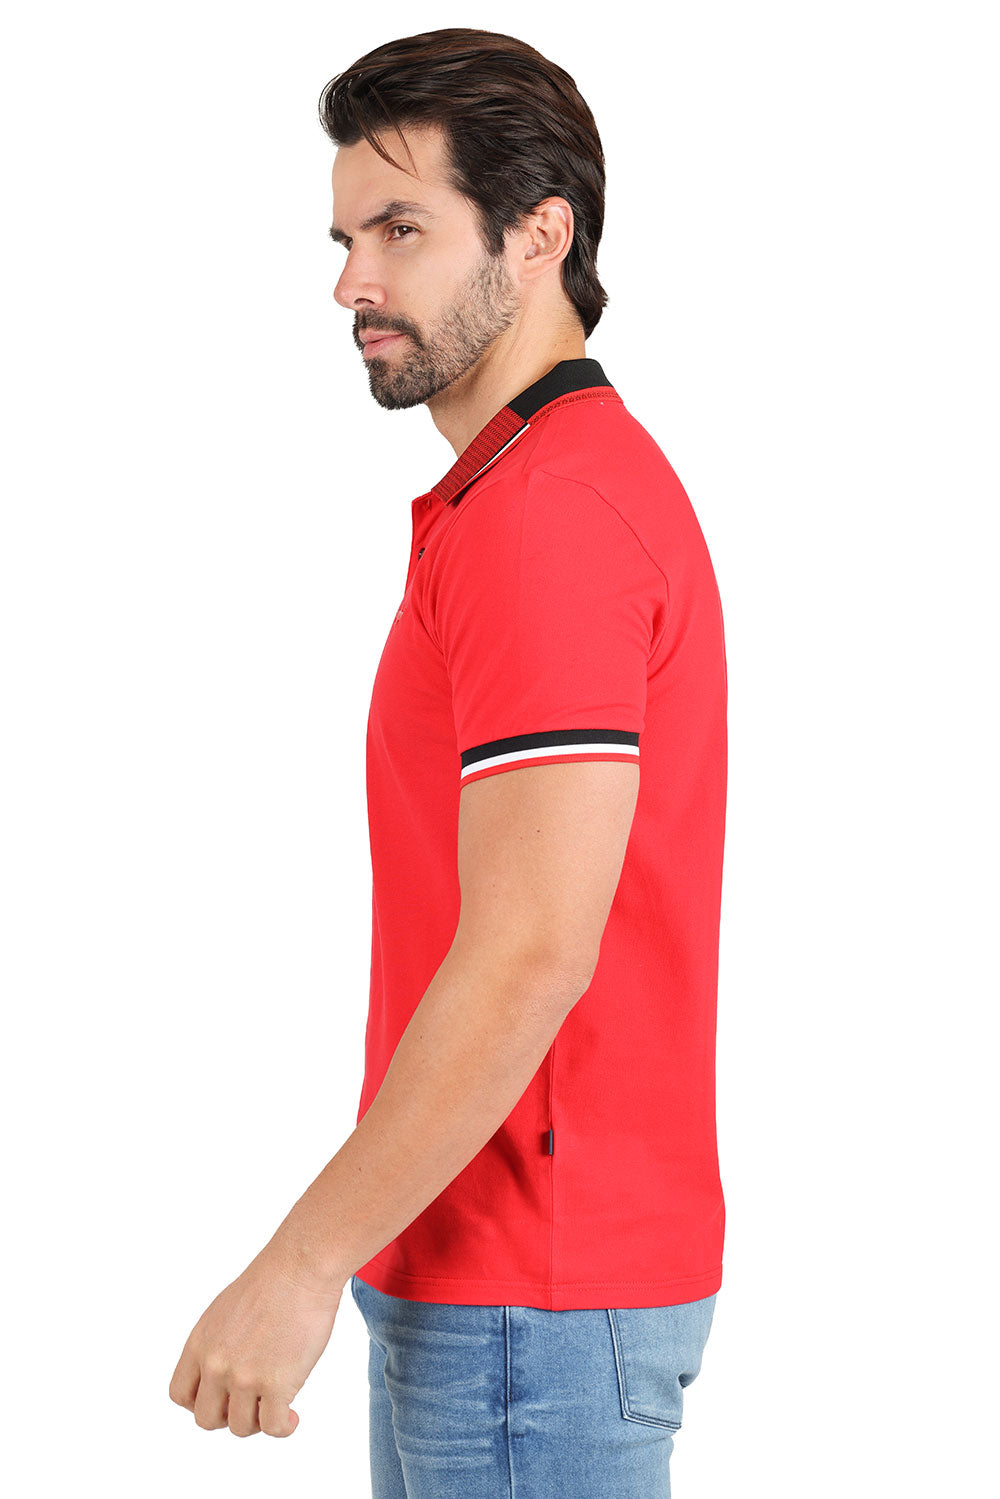 Barabas Men's Solid Color Cotton Short Sleeve Polo Shirts 3PS125 Red